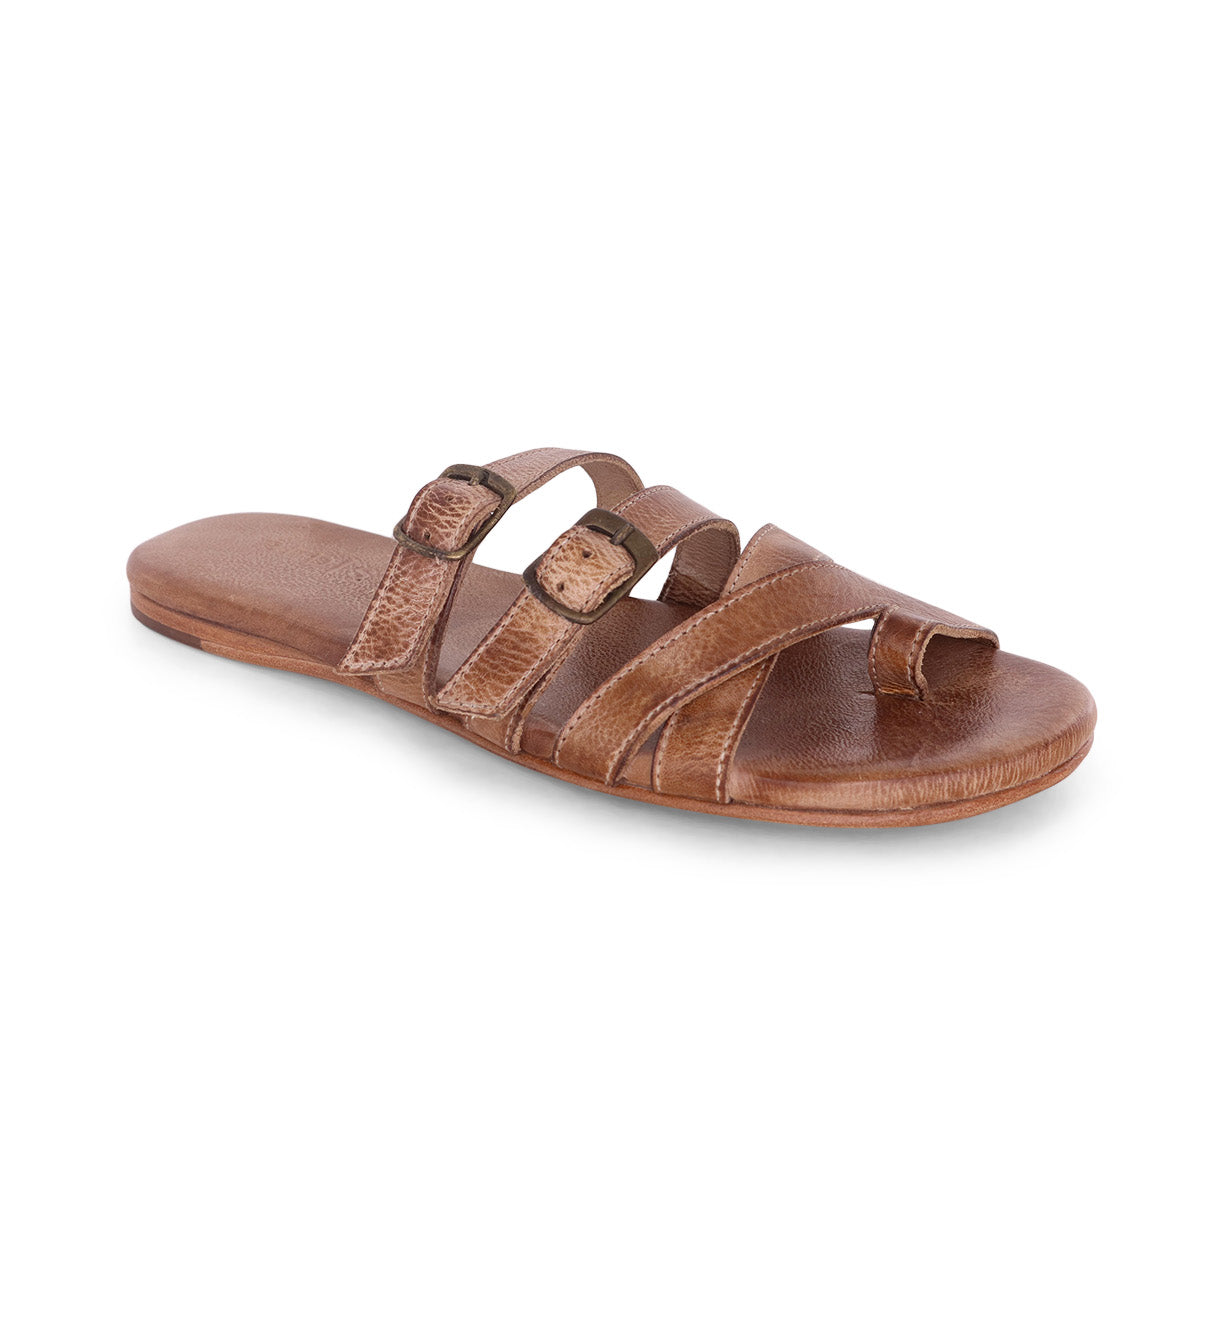 A women's tan leather sandal with straps called Hilda by Bed Stu.